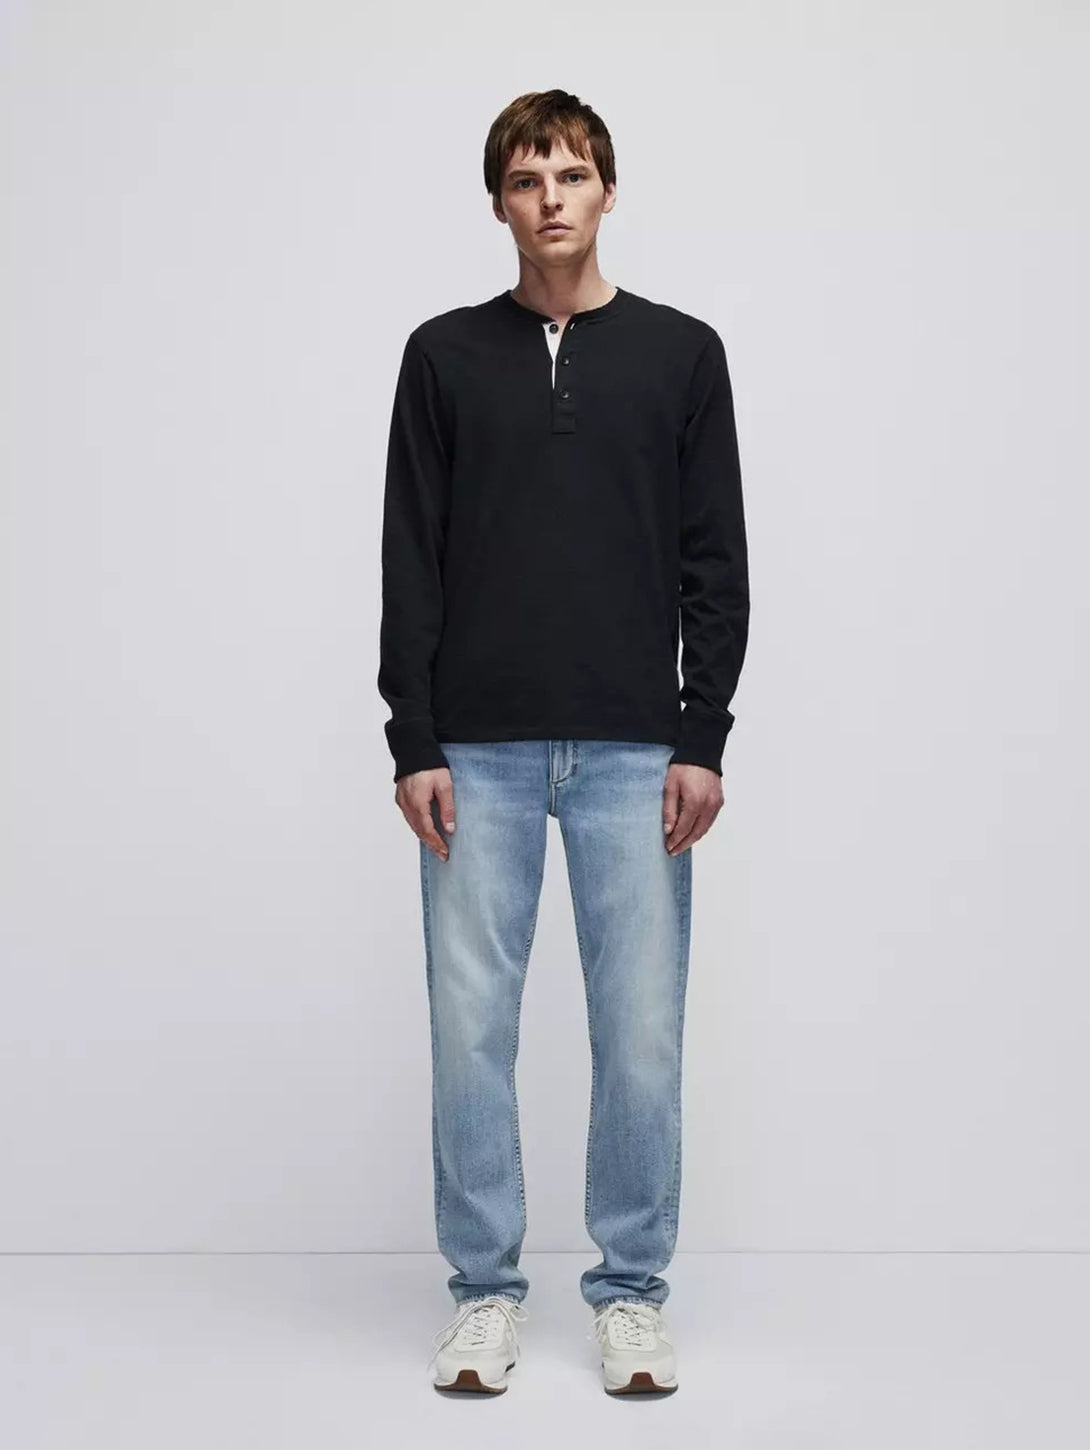 Rag & Bone Launches New Range of Denim: Engineered for a Perfect Fit!